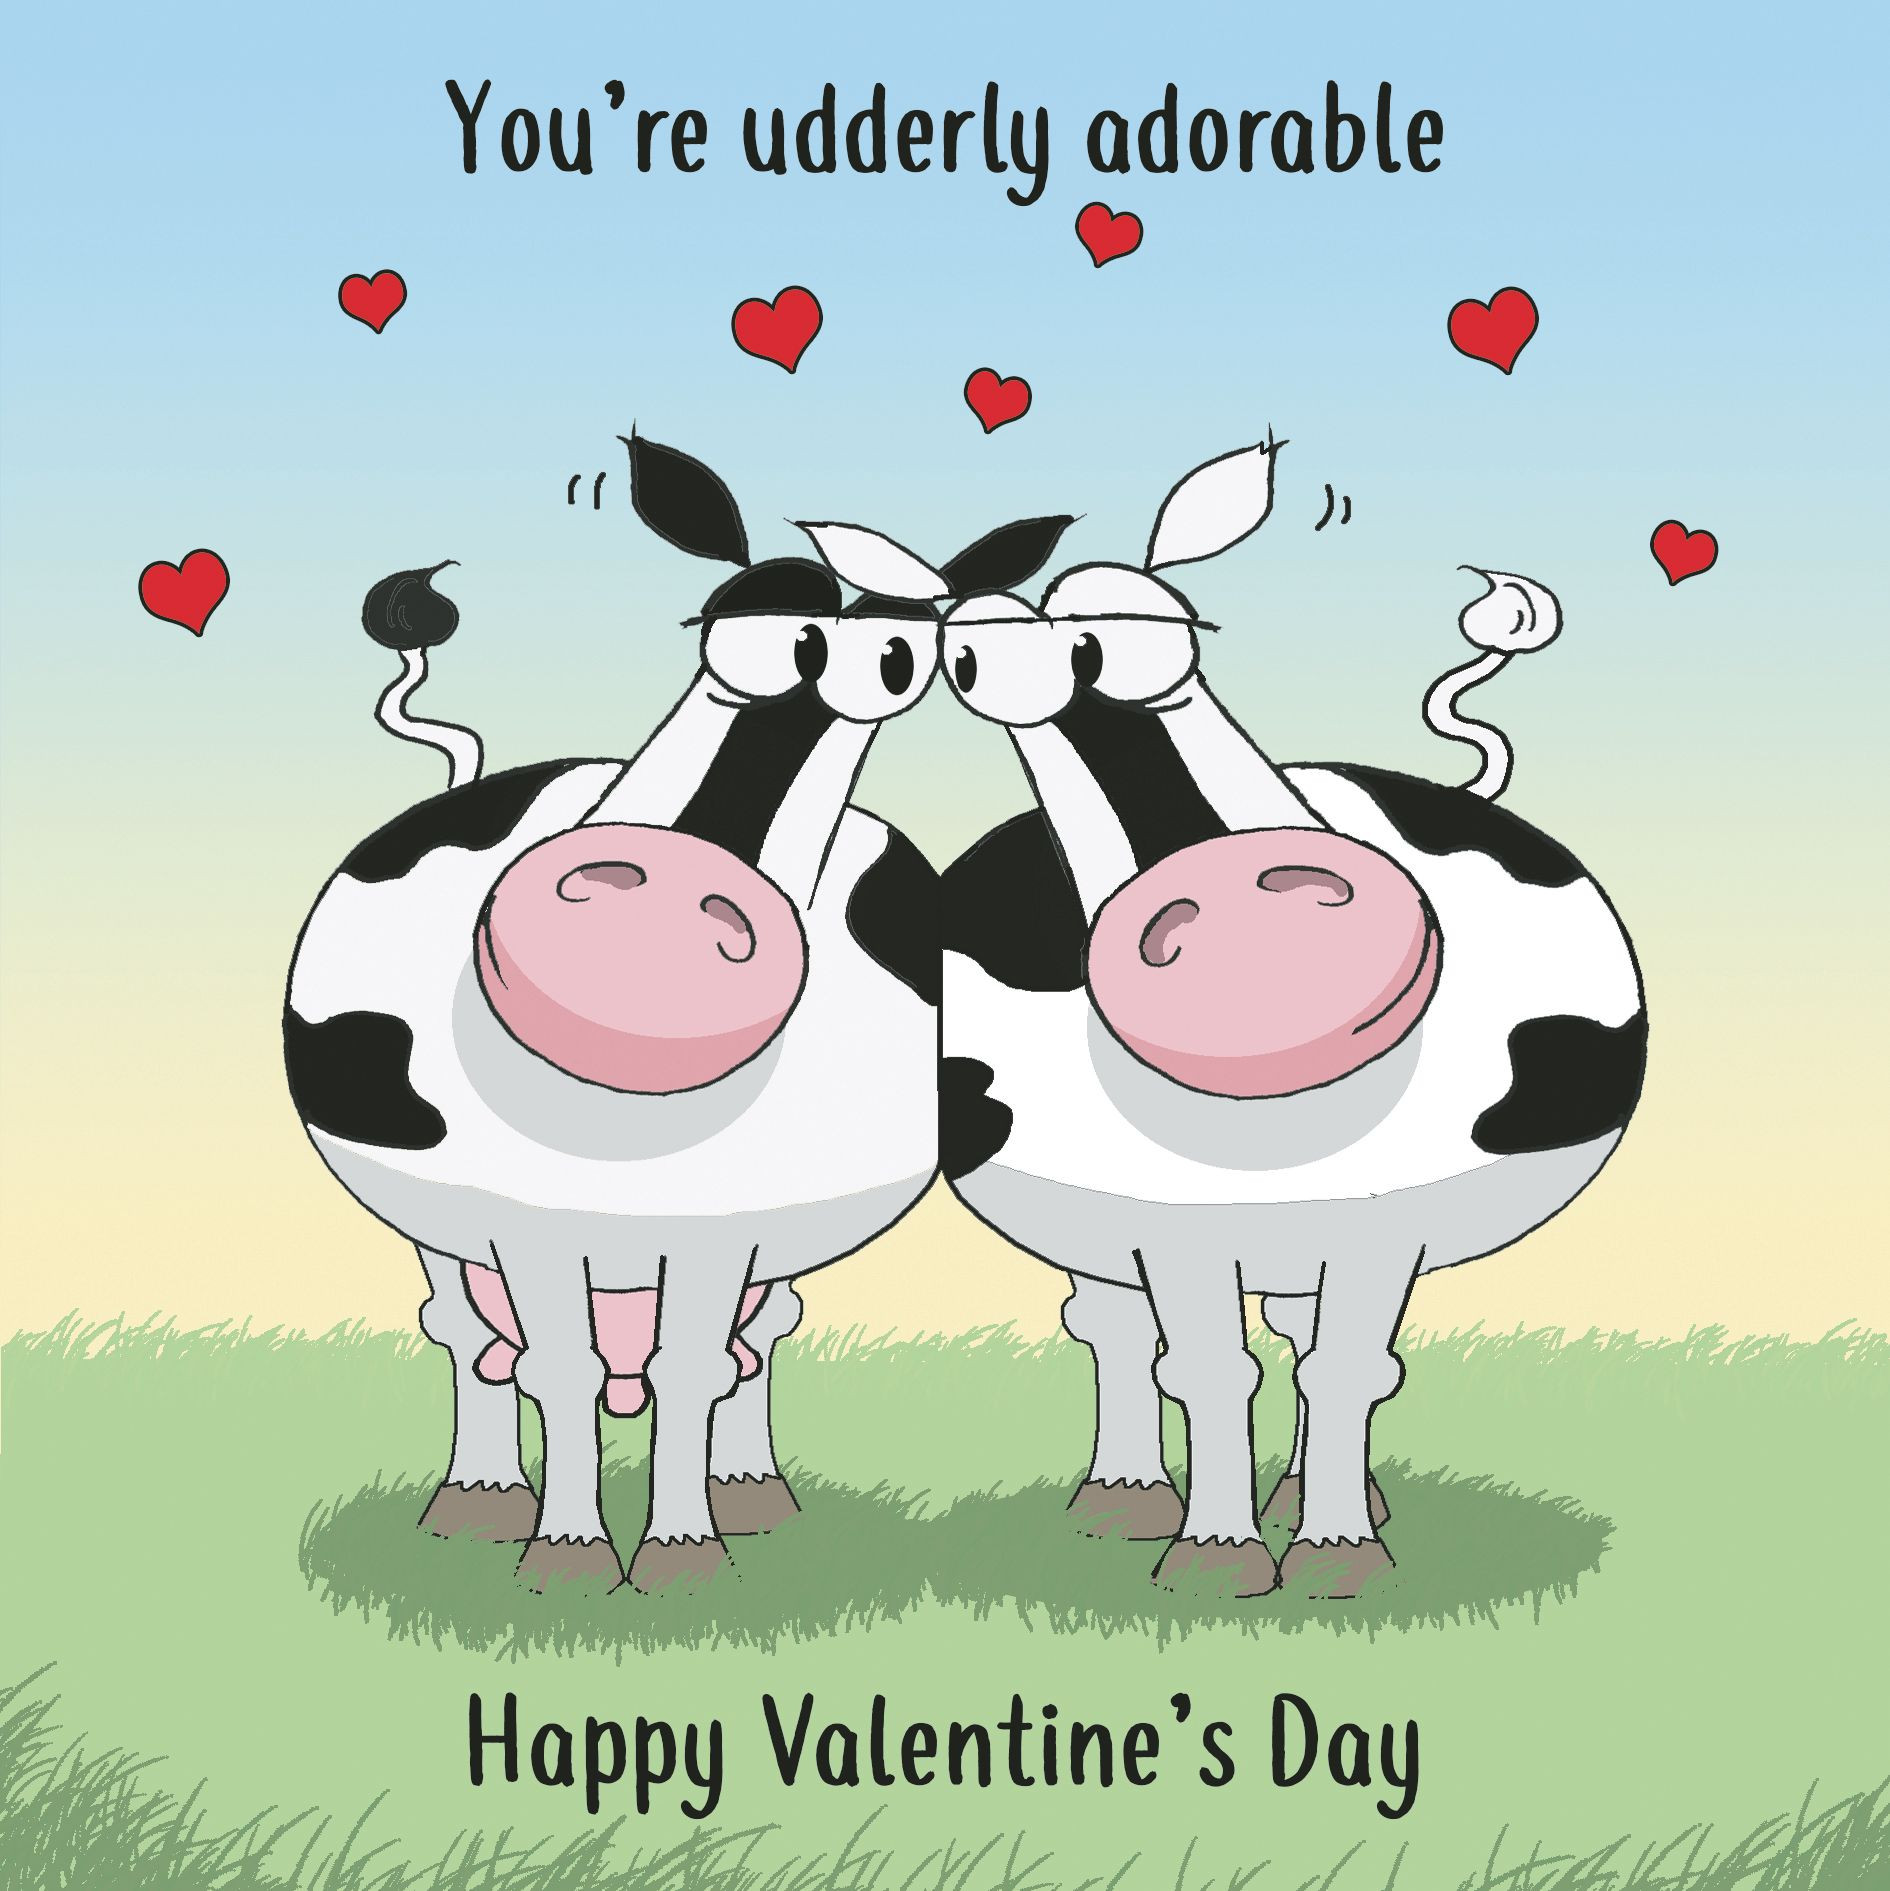 Funny Valentines Day Quotes
 Funny Valentines Day Cards Funny Valentine Cards Funny